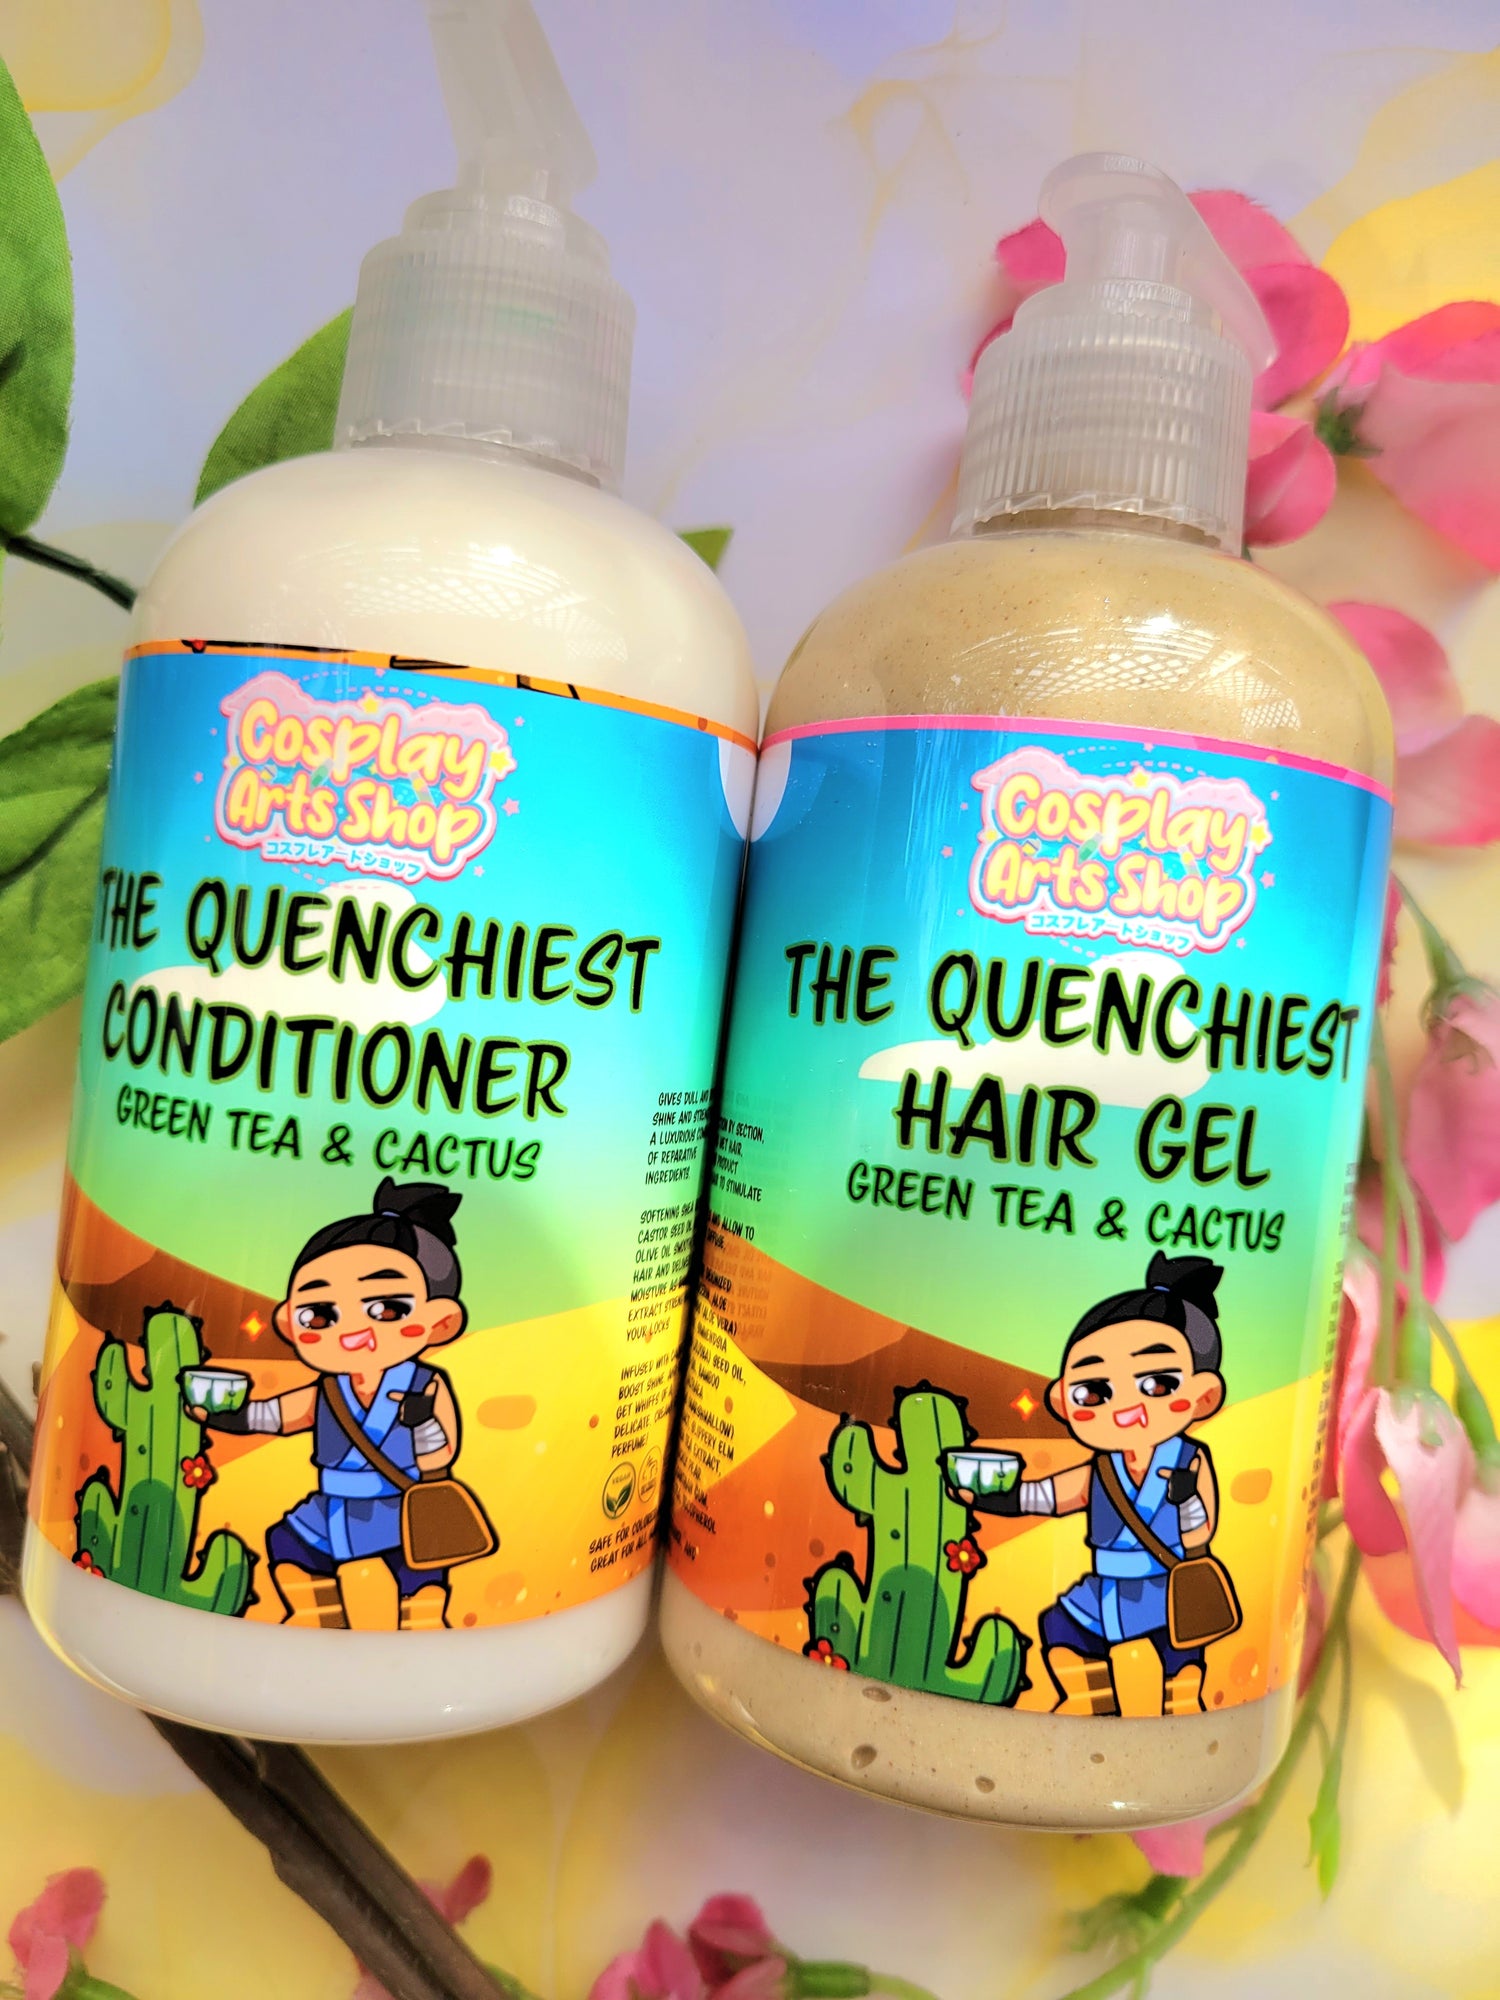 The Quenchiest Conditioner - Cosplay Arts Shop